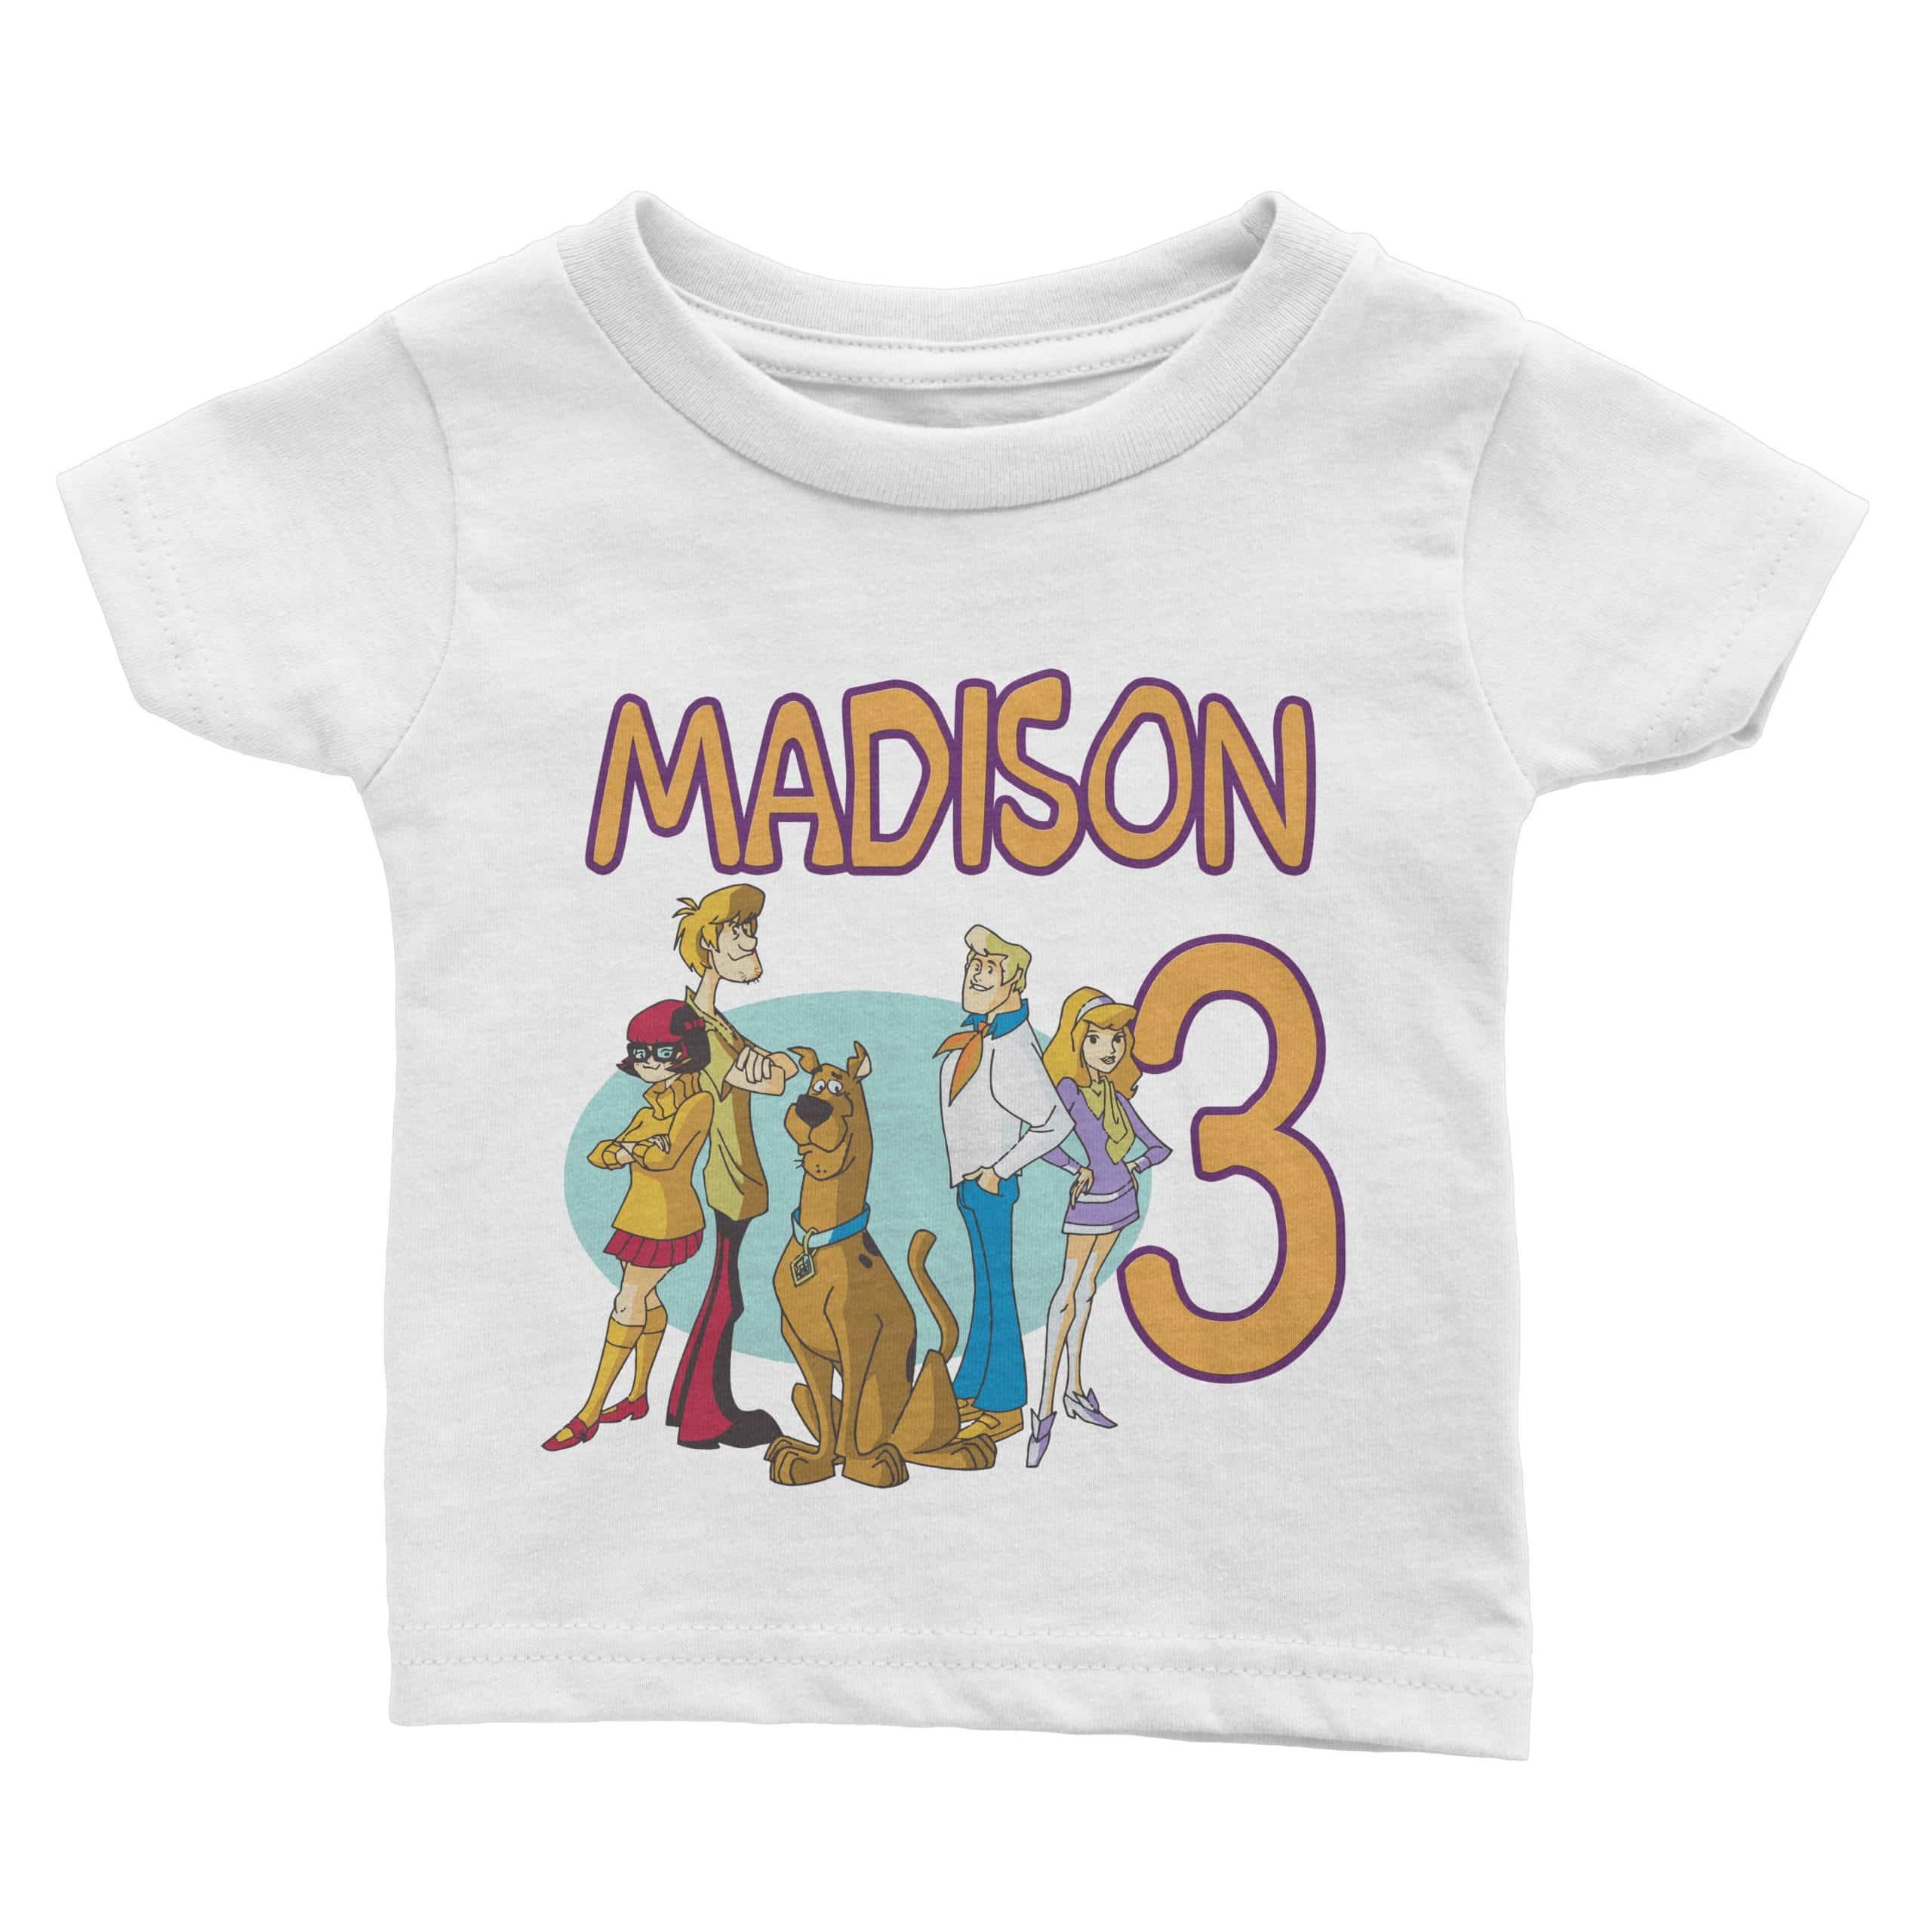 Inspired By The Scoob Scoob Movie Shirt Moive Personalized Scooby-Doo Birthday Shirt Family Party Birthday Shirt